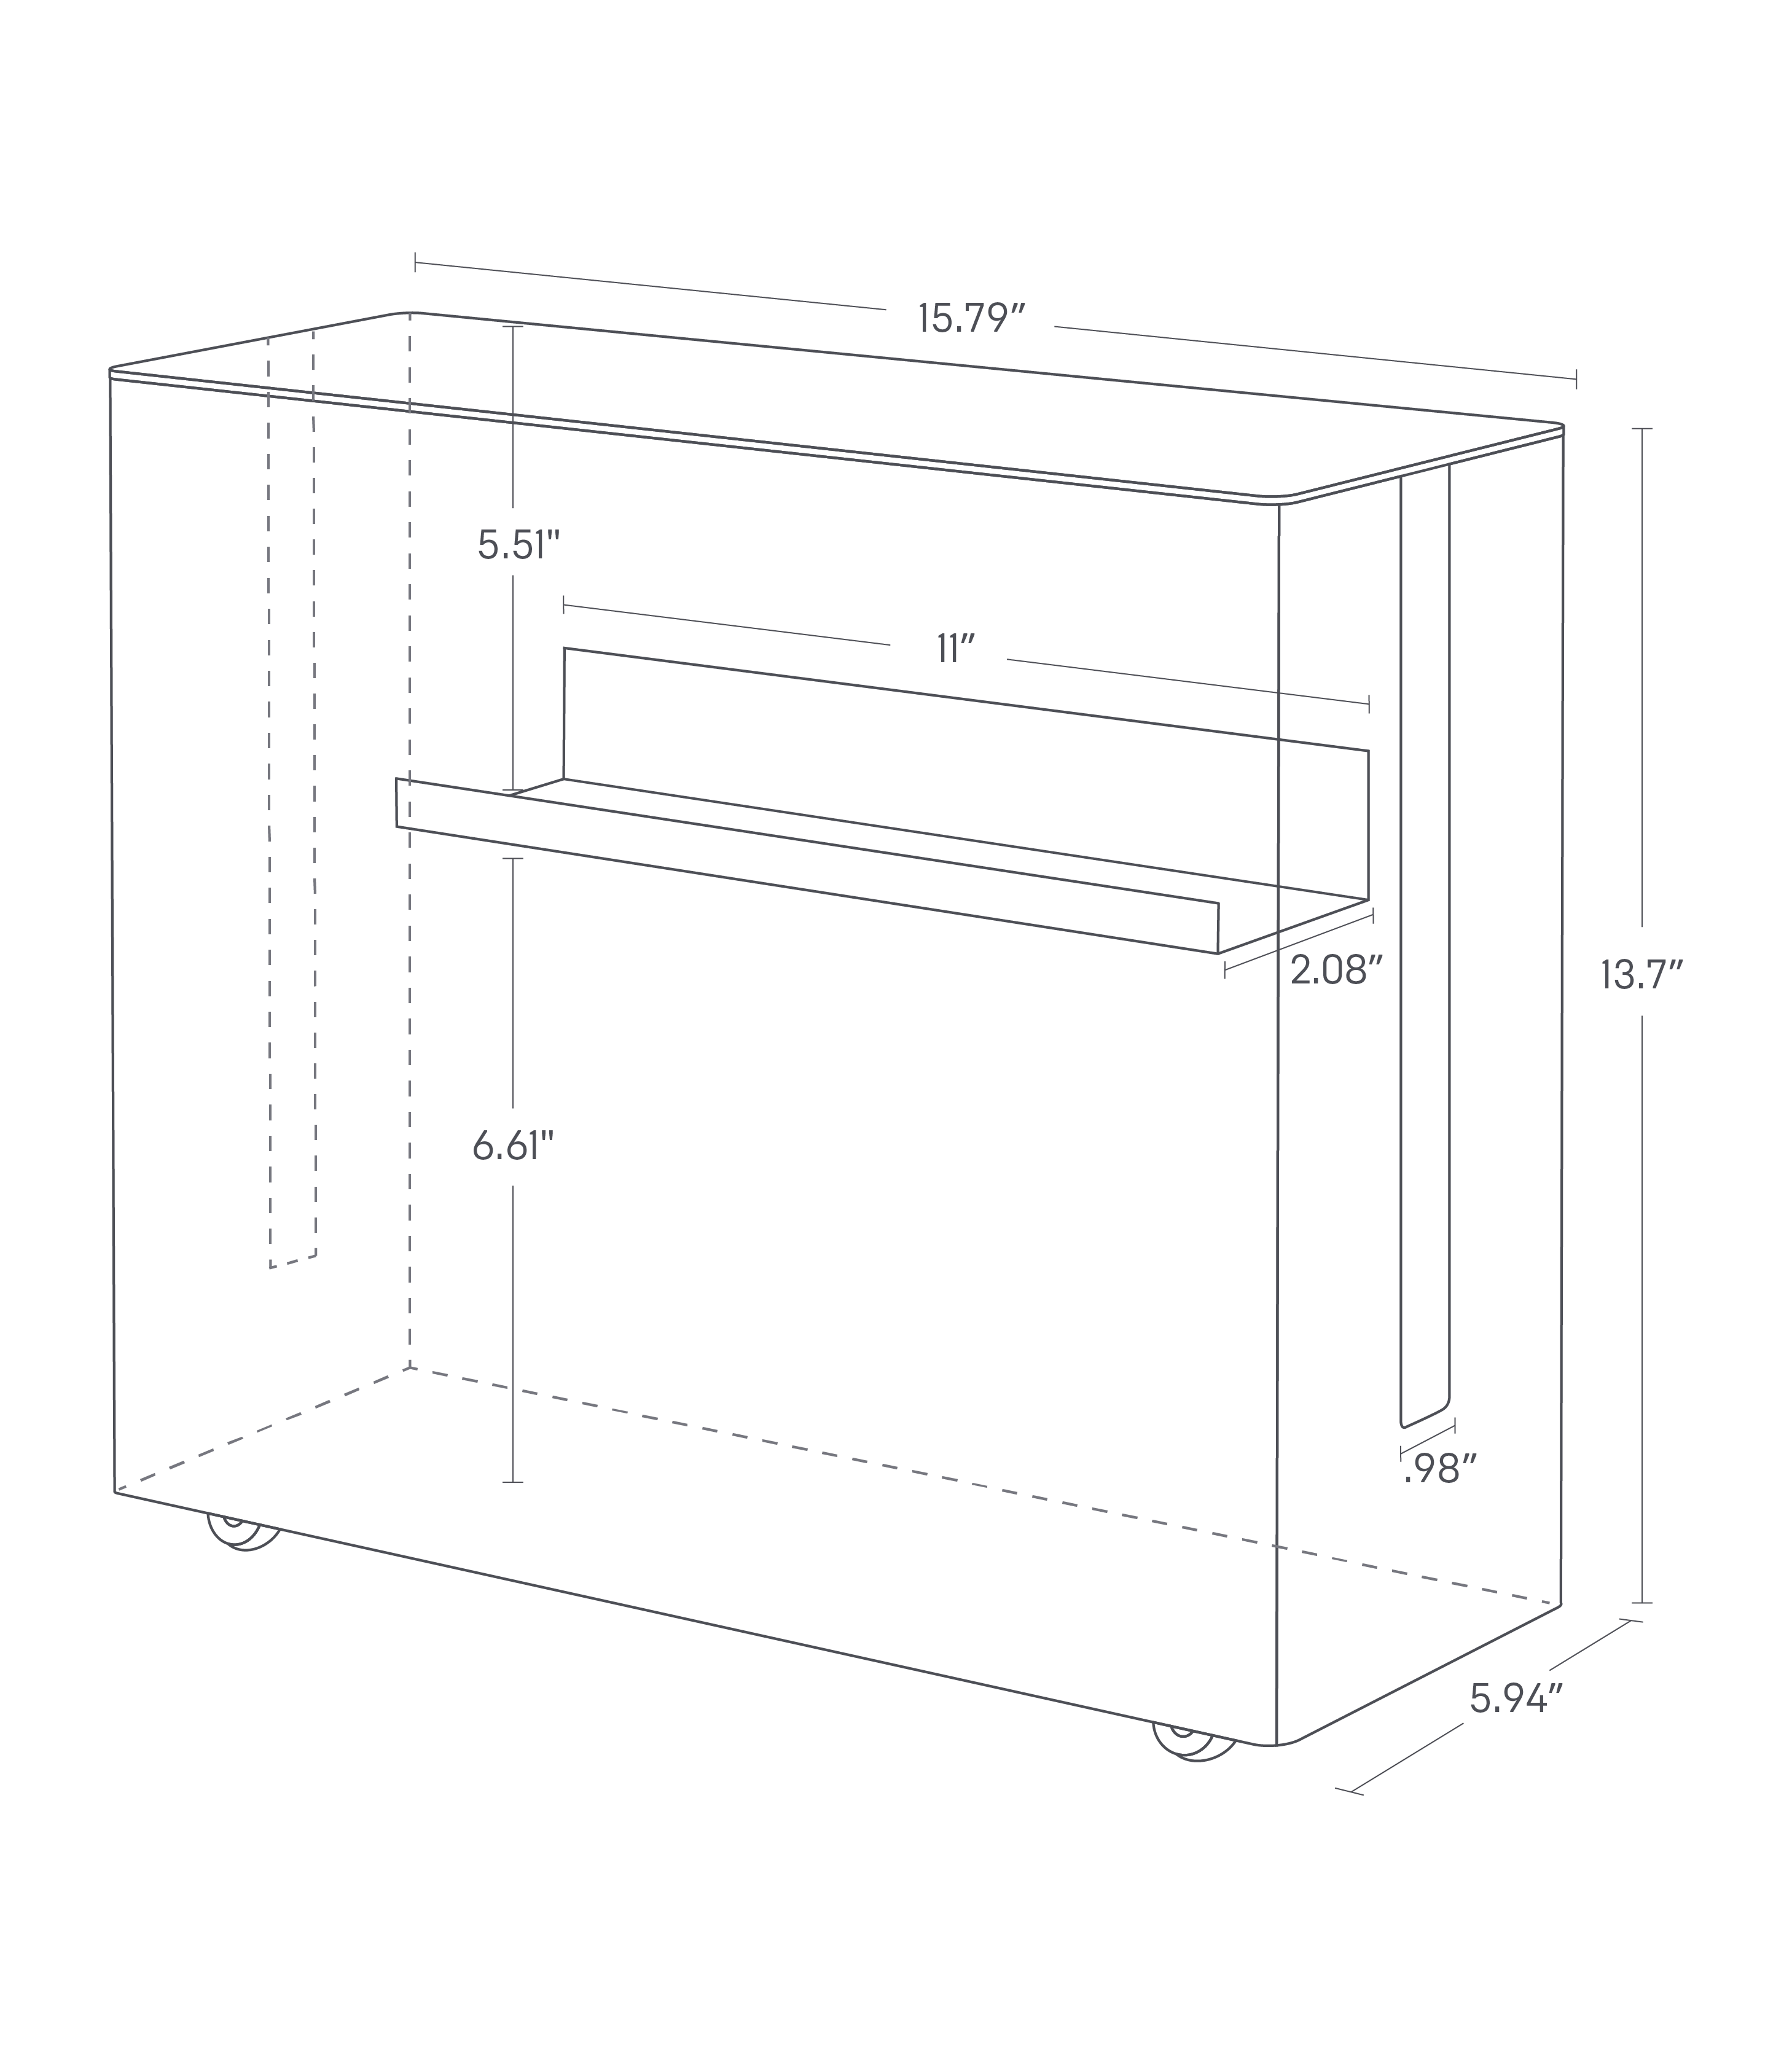 Dimension image for Rolling Cable Management Box showing a total length of 15.79